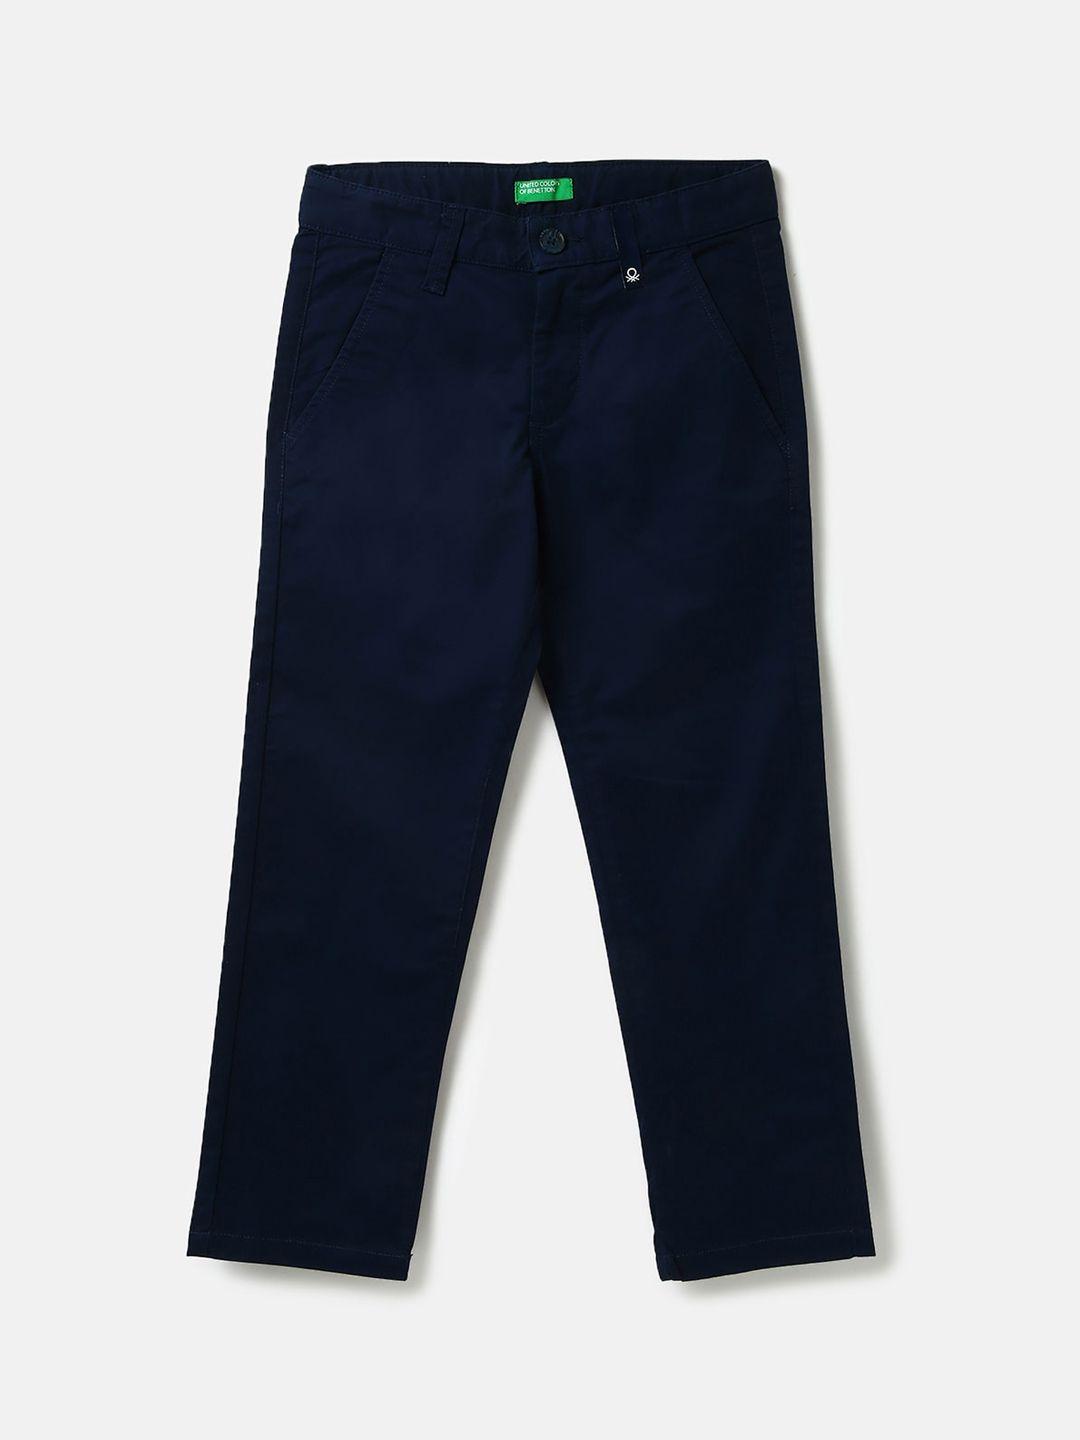 united colors of benetton boys cotton chinos trousers